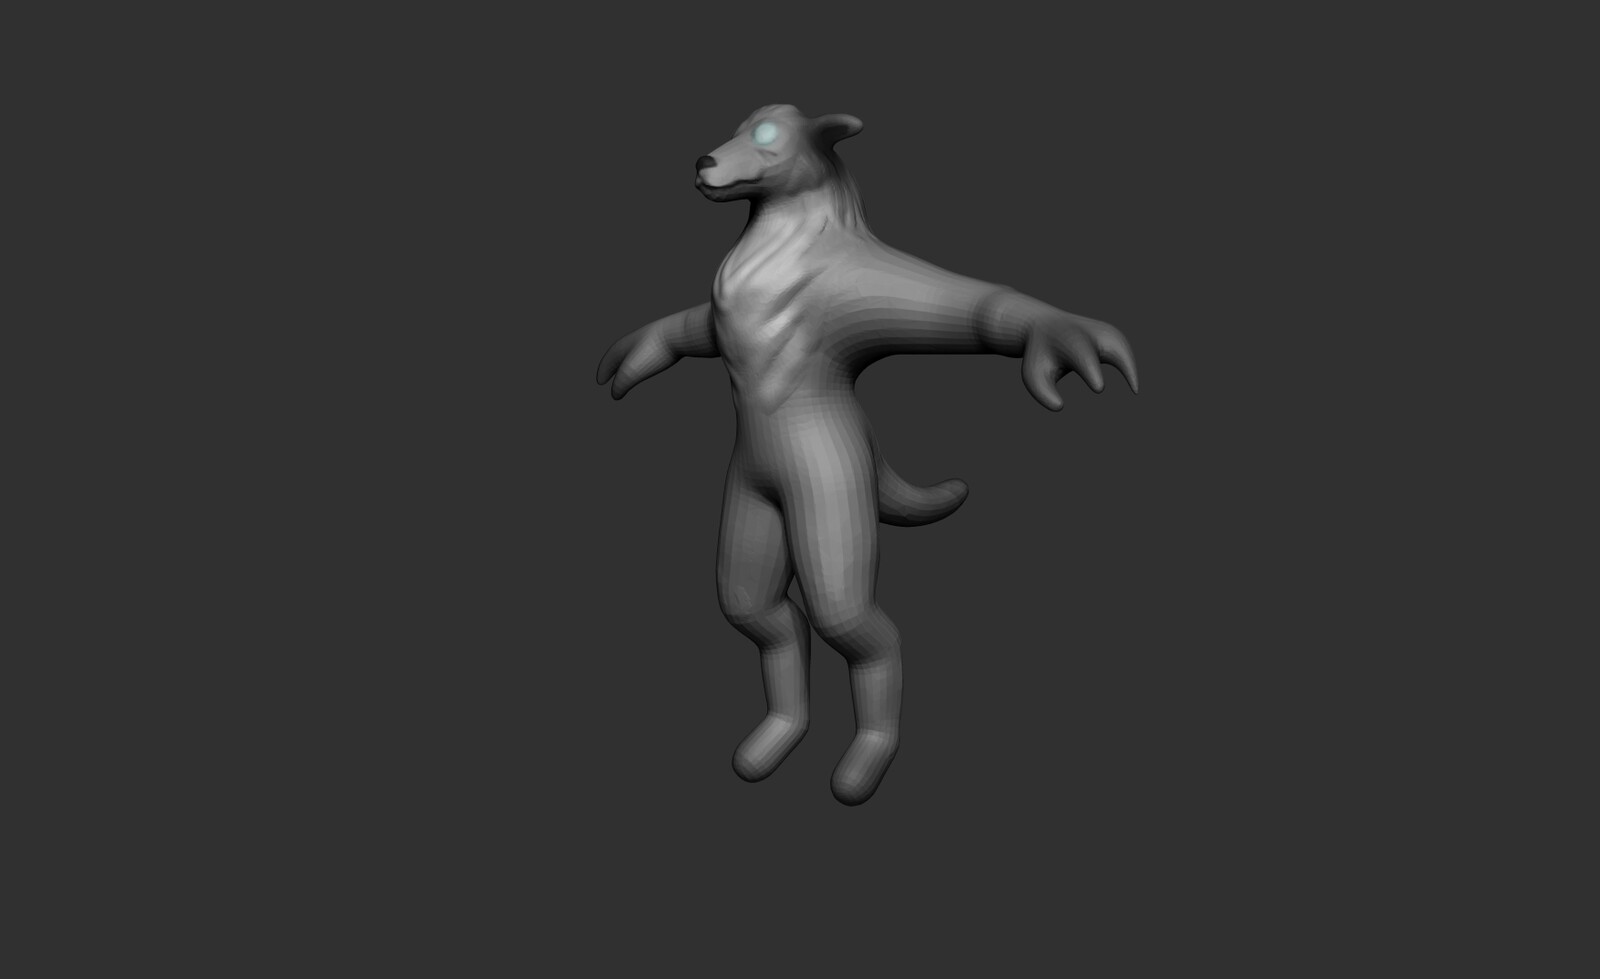 Low poly Werewolf model made in Zbrush.